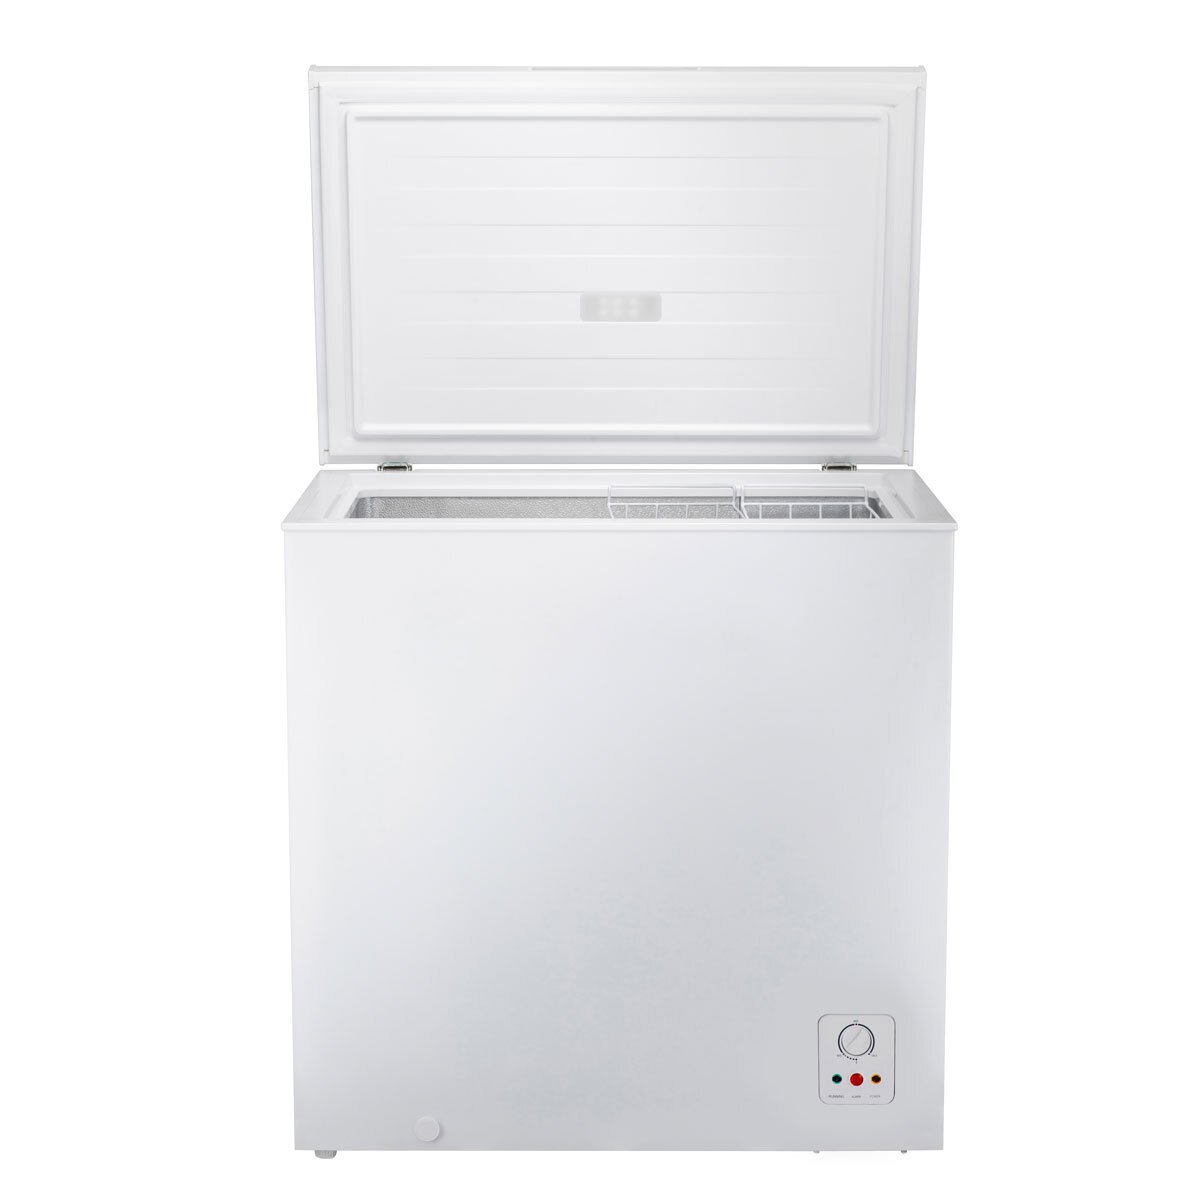 Hisense FC252D4BW1, 198L, Chest Freezer, A+ Rated in White - Signature Retail Stores